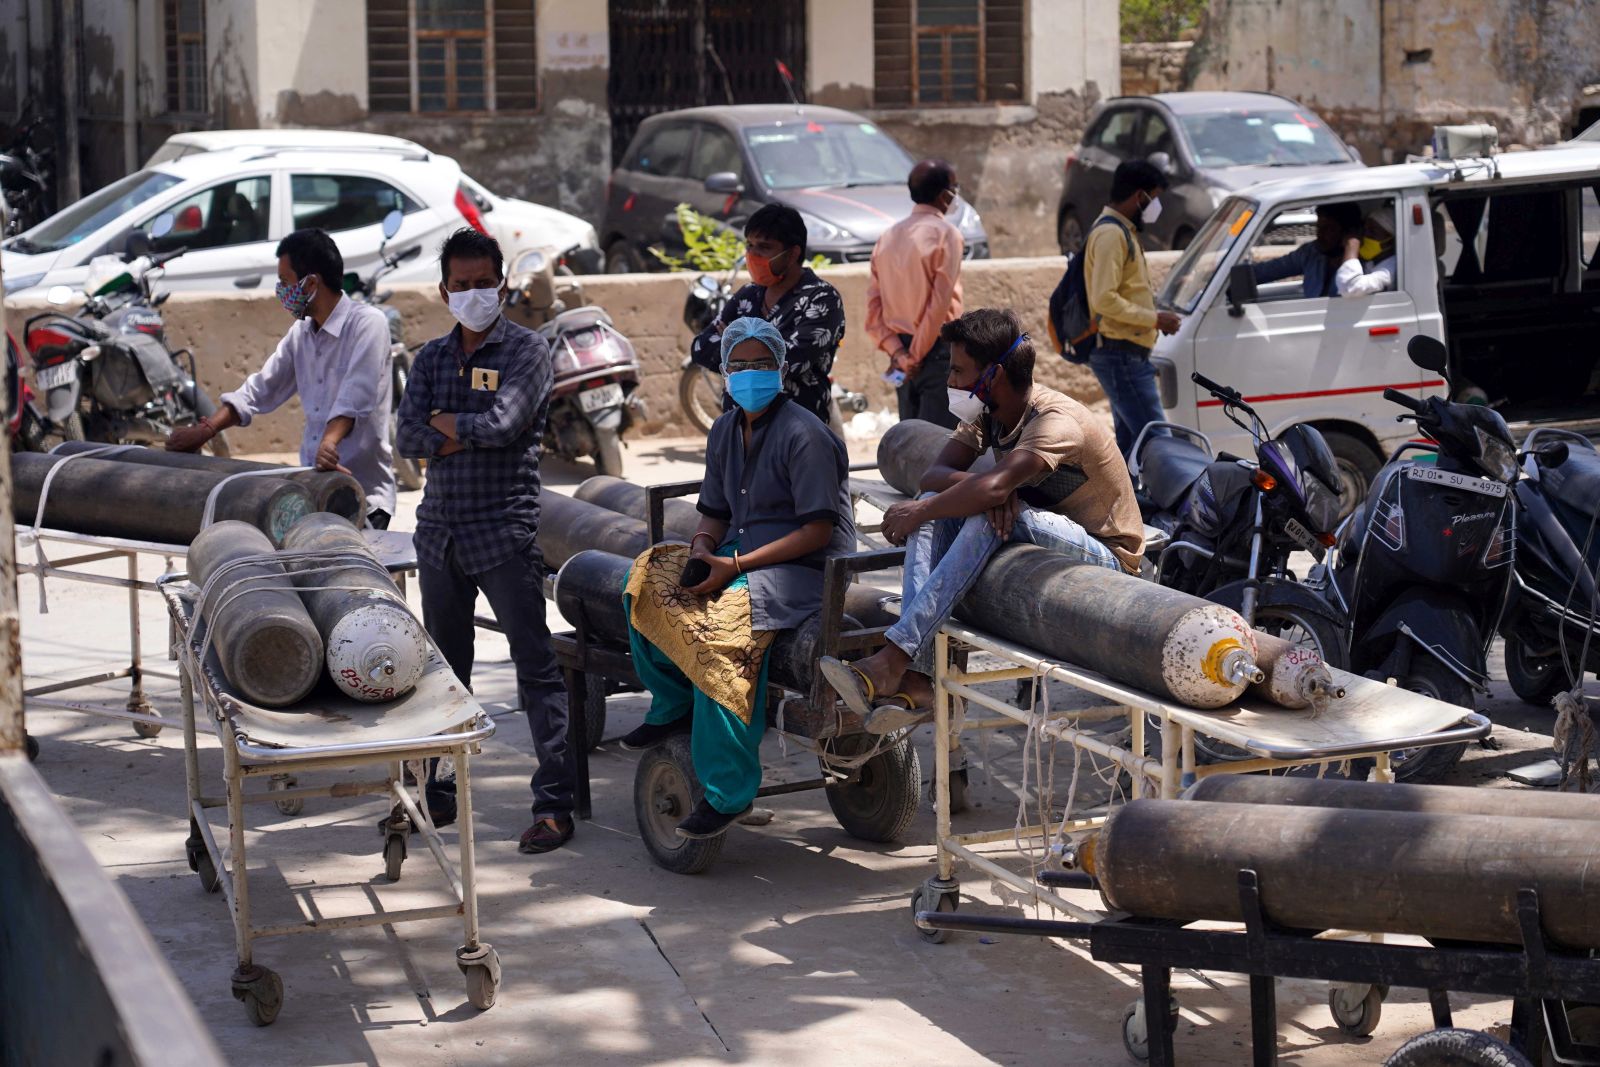 Lining up to refill oxygen cylinders in Amritsar in mid-May.